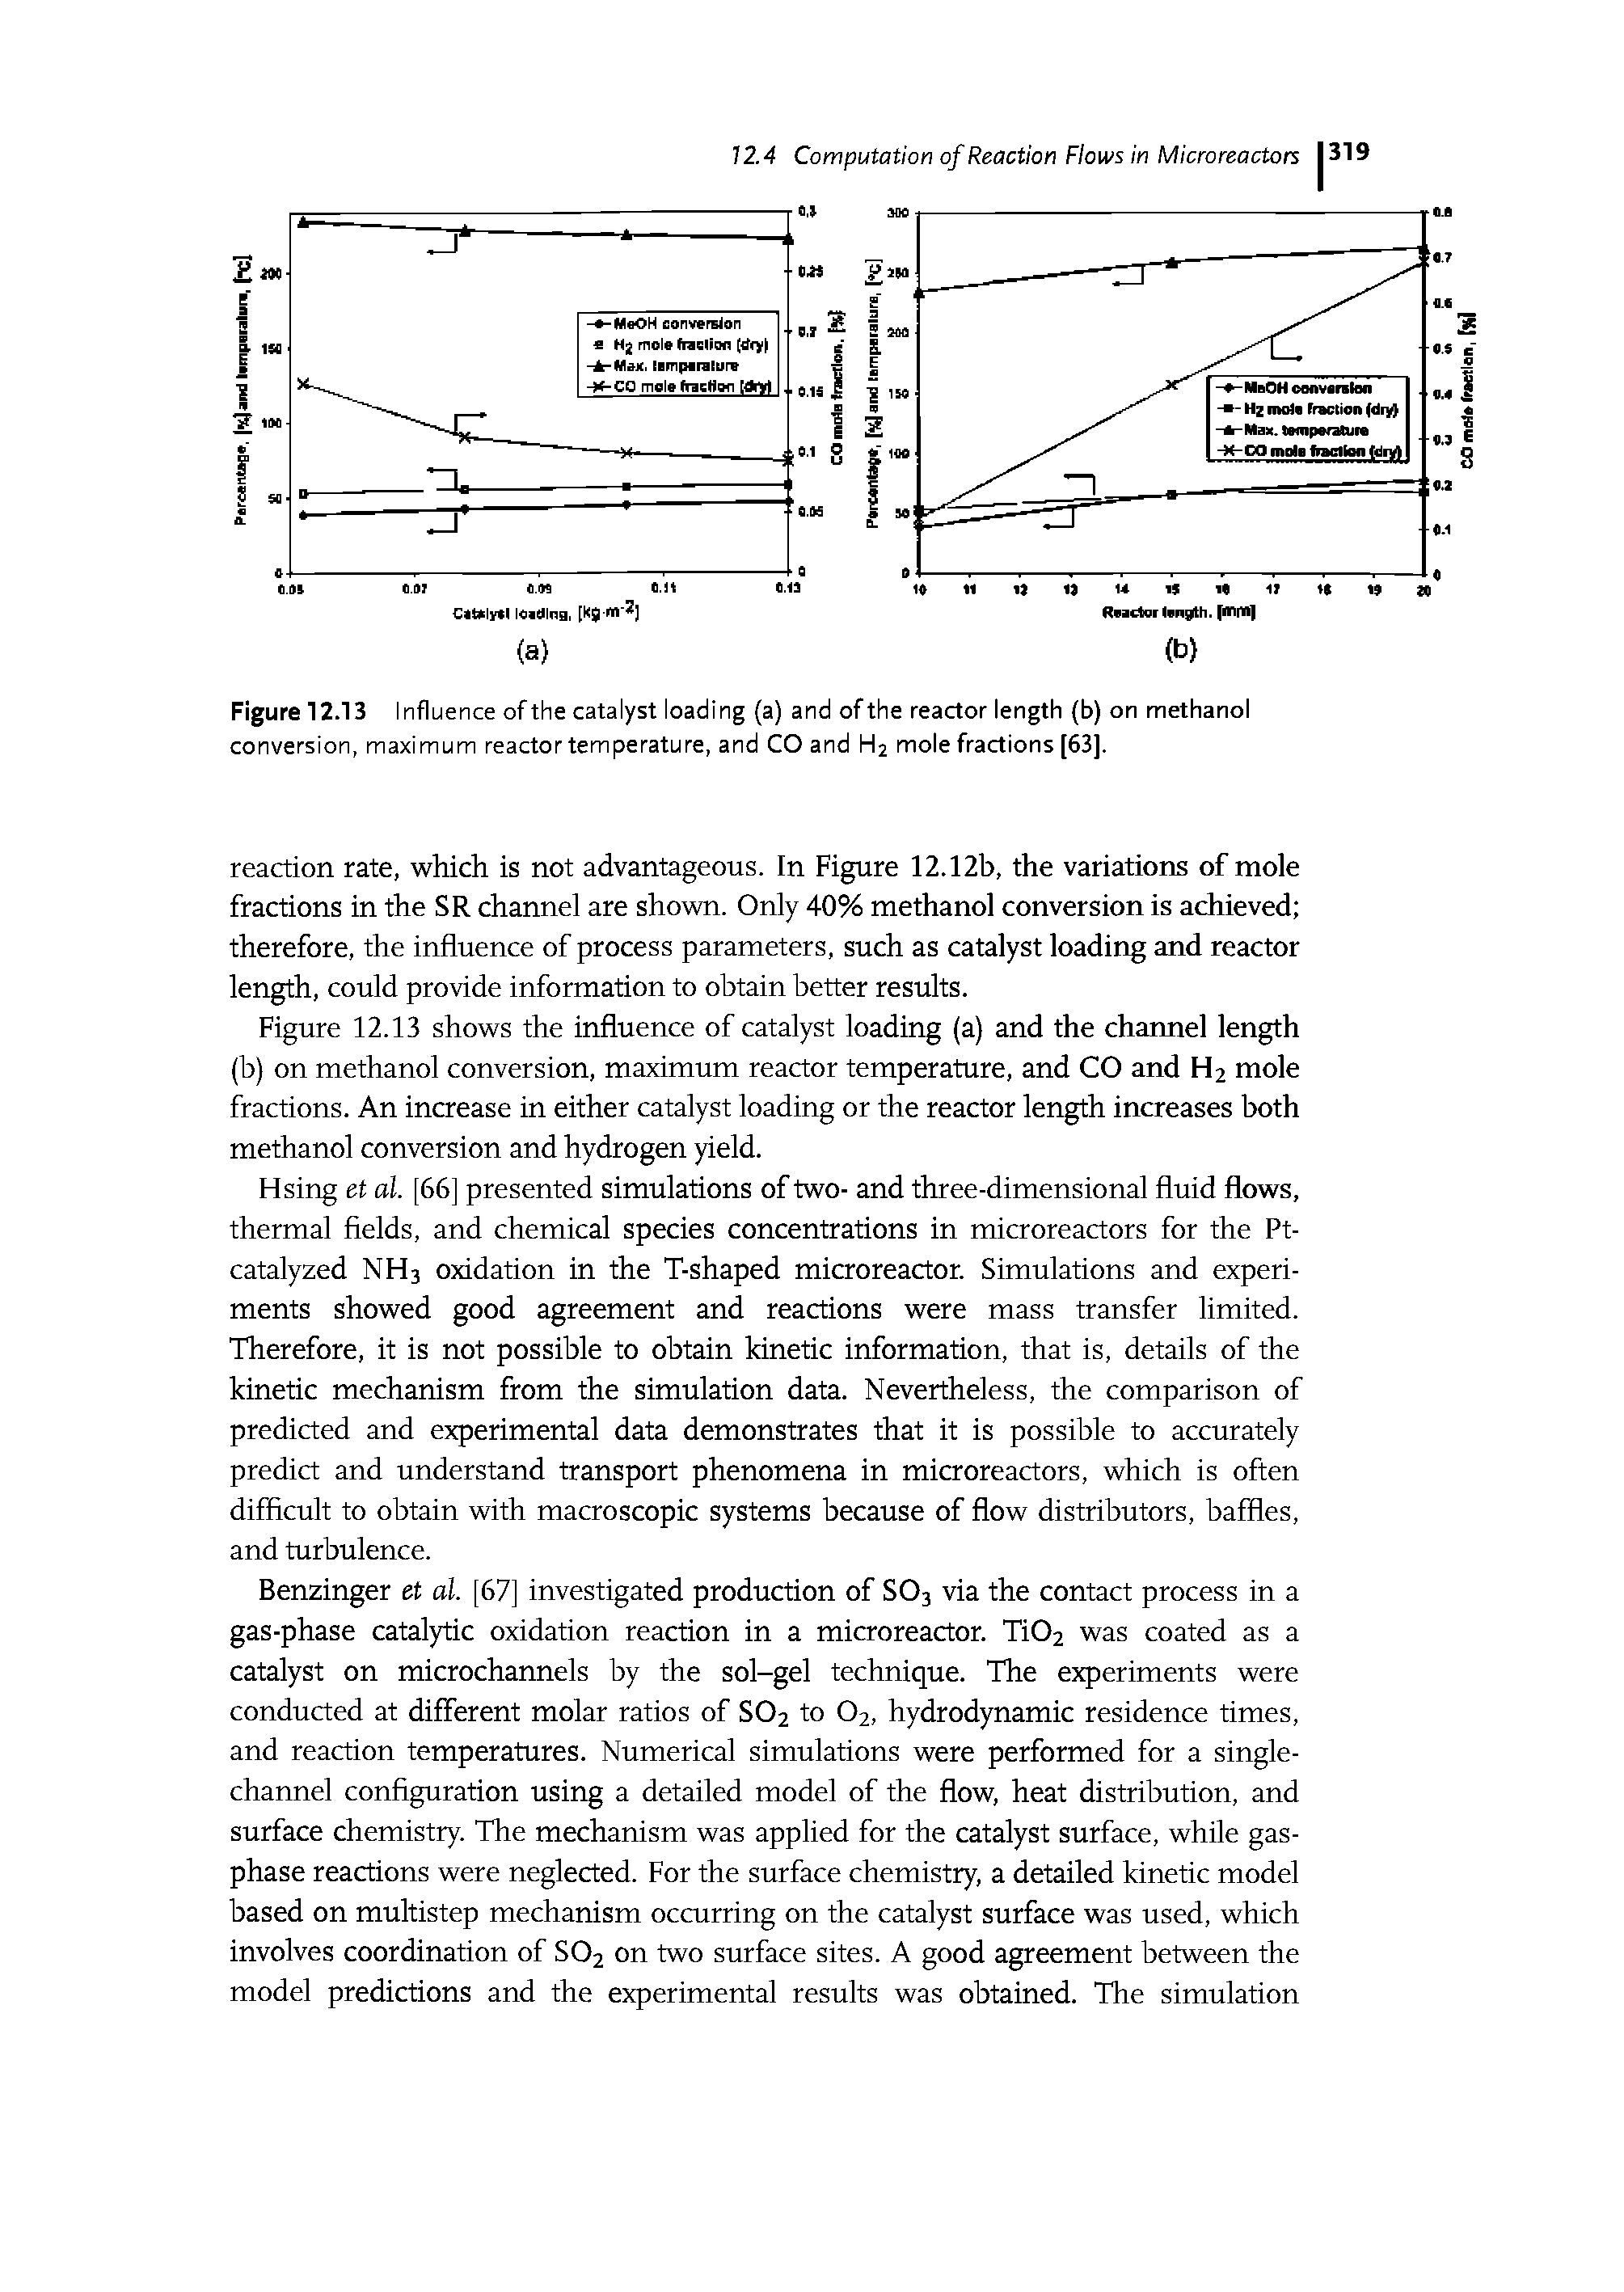 Figure 12.13 Influence of the catalyst loading (a) and of the reactor length (b) on methanol conversion, maximum reactor temperature, and CO and H2 mole fractions [63].